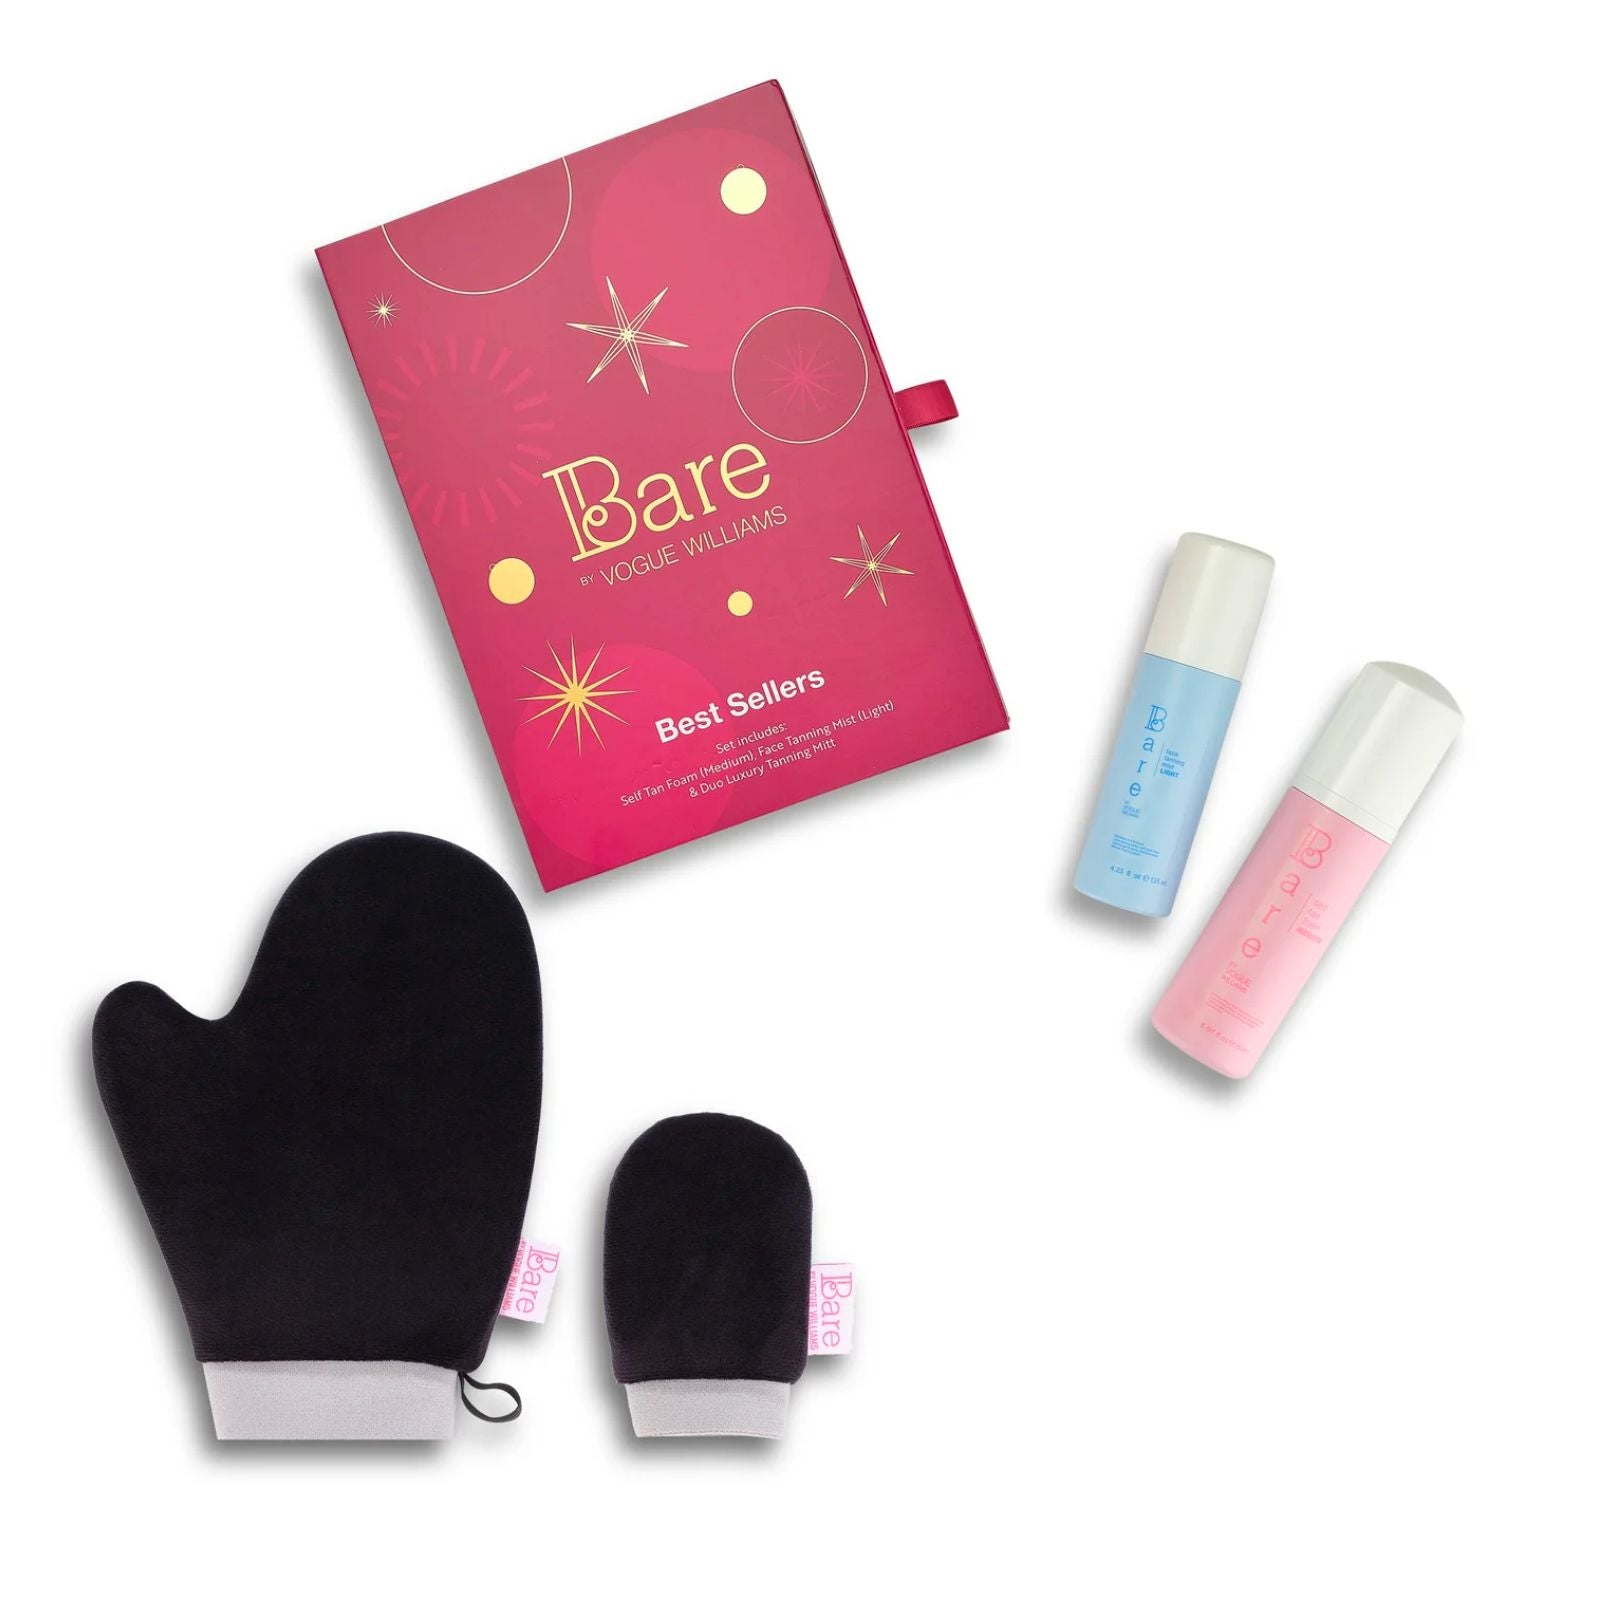 Bare by Vogue Bare by Vogue | Best Sellers Gift Set - SkinShop